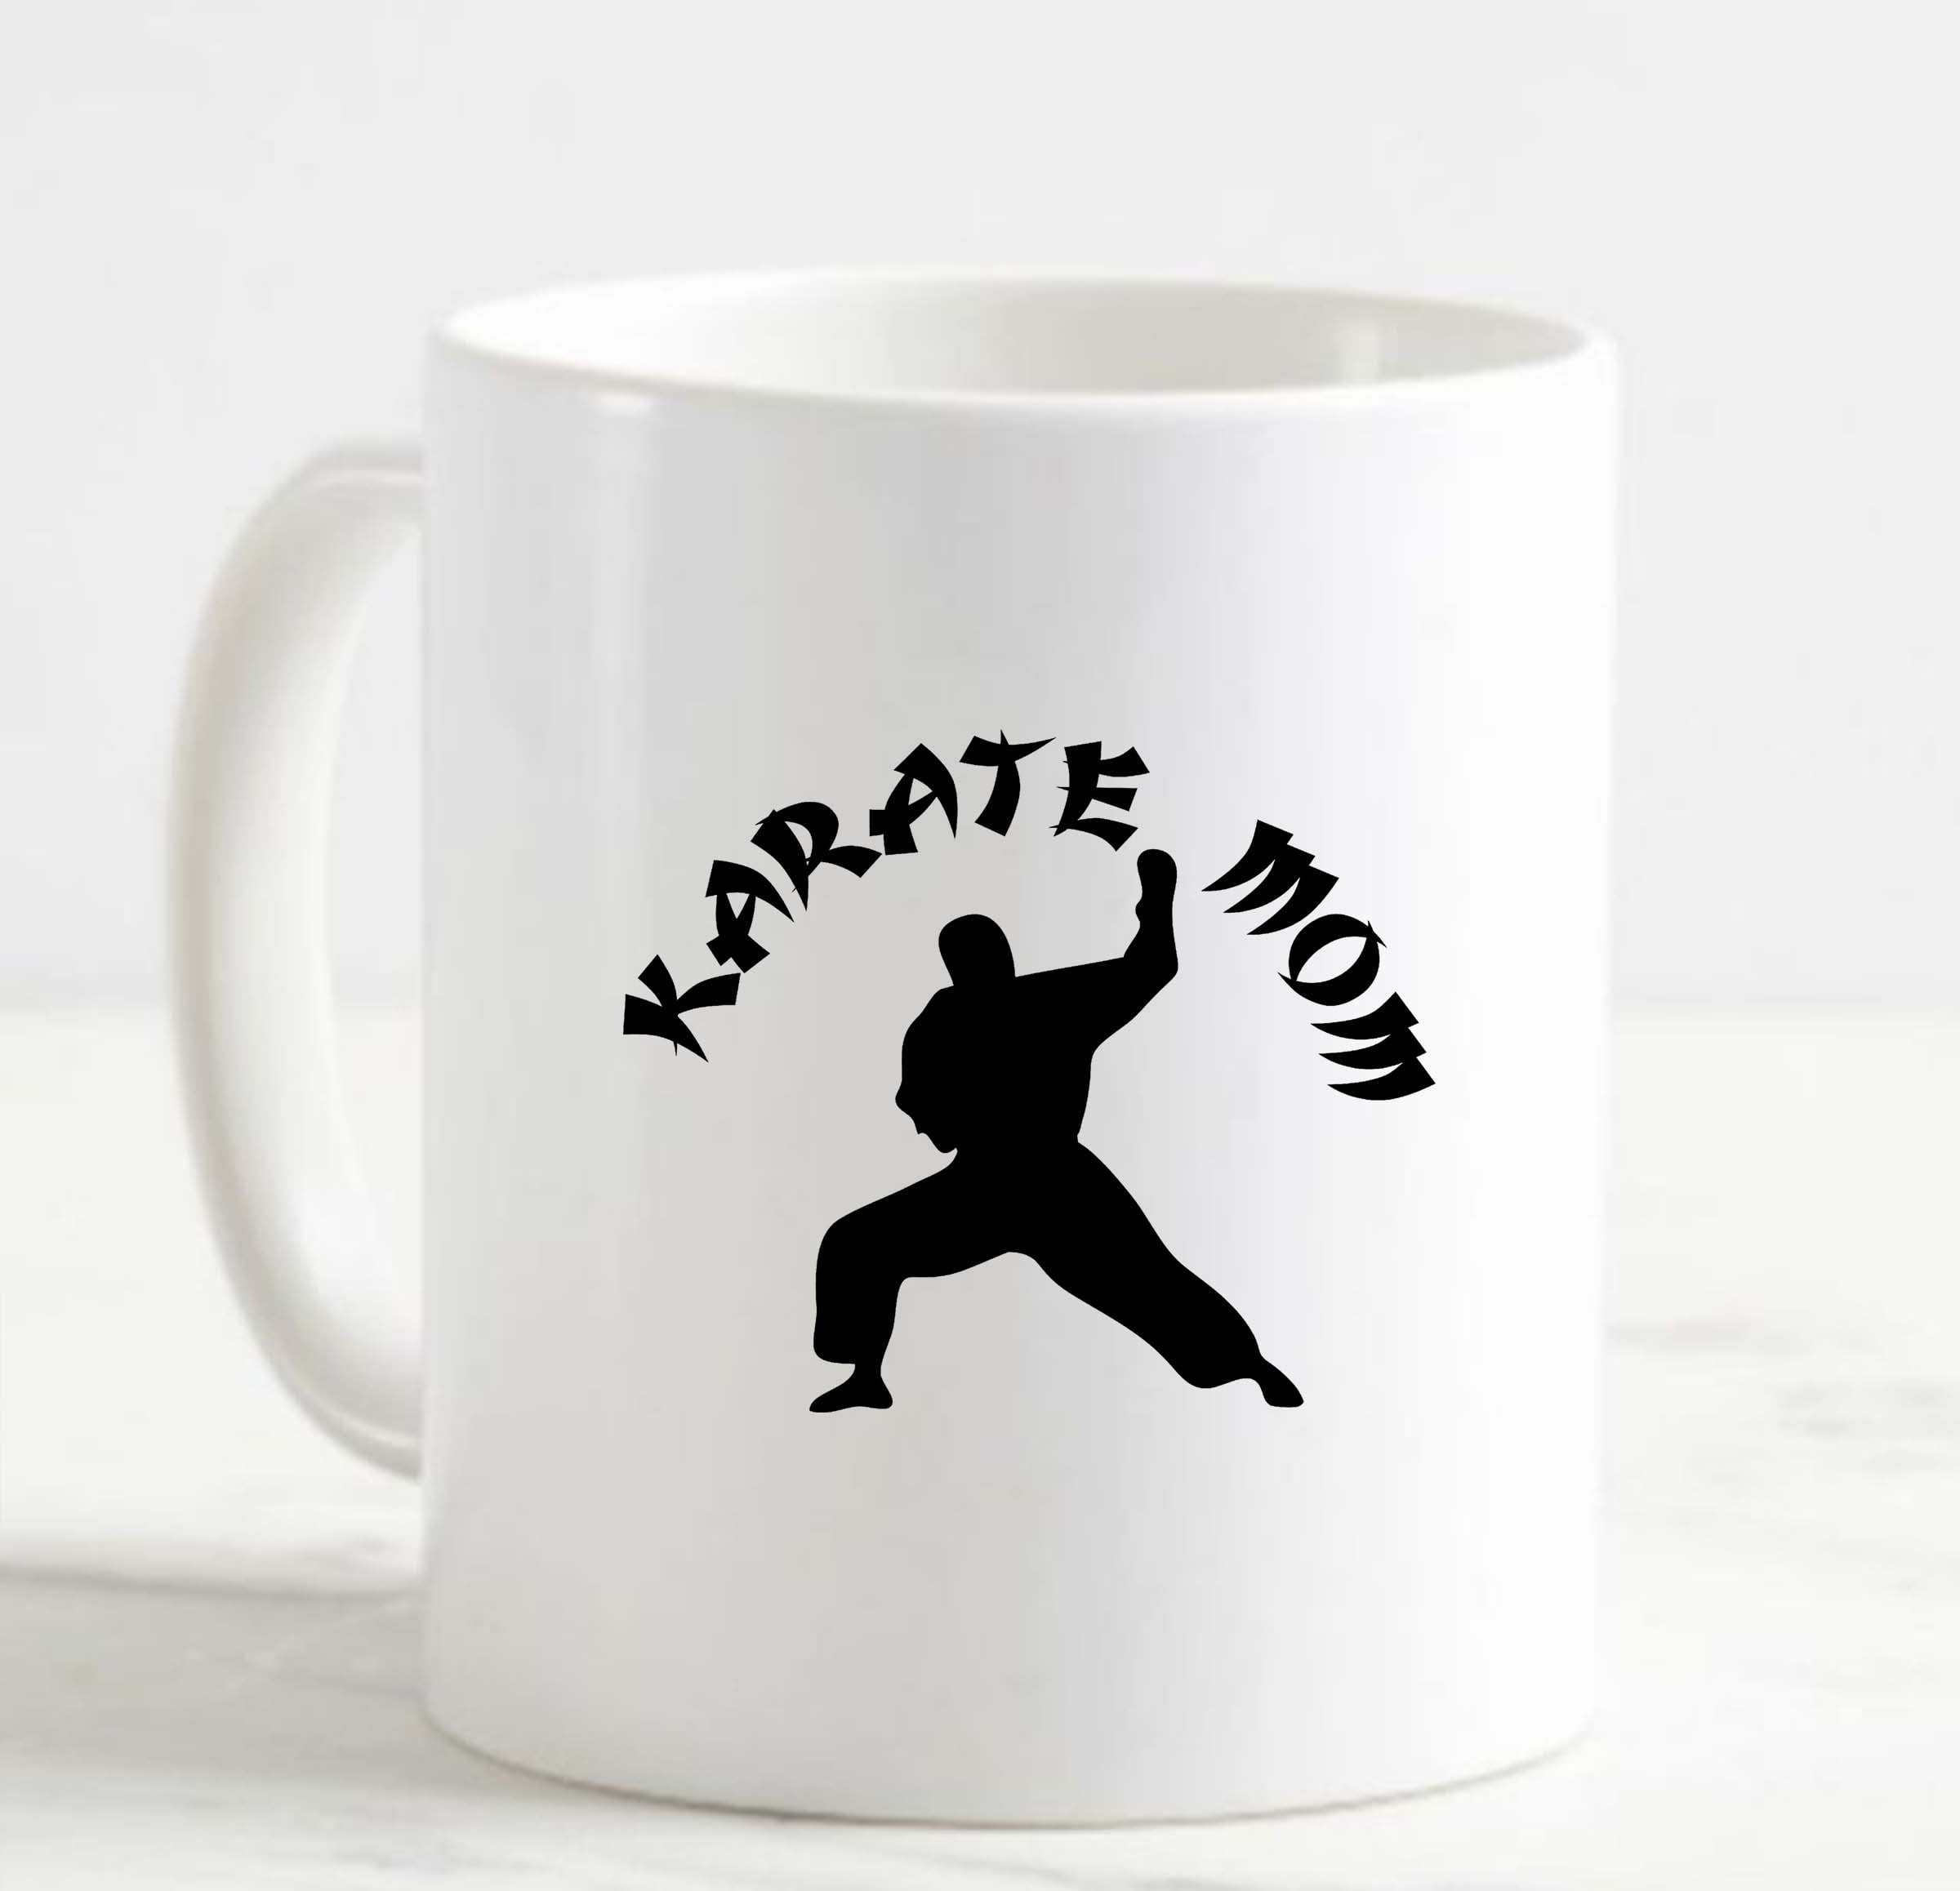 Coffee Mug Karate Mom Takeout Boy Proud Supporter Discipline Sports White  Cup Funny Gifts for work office him her 